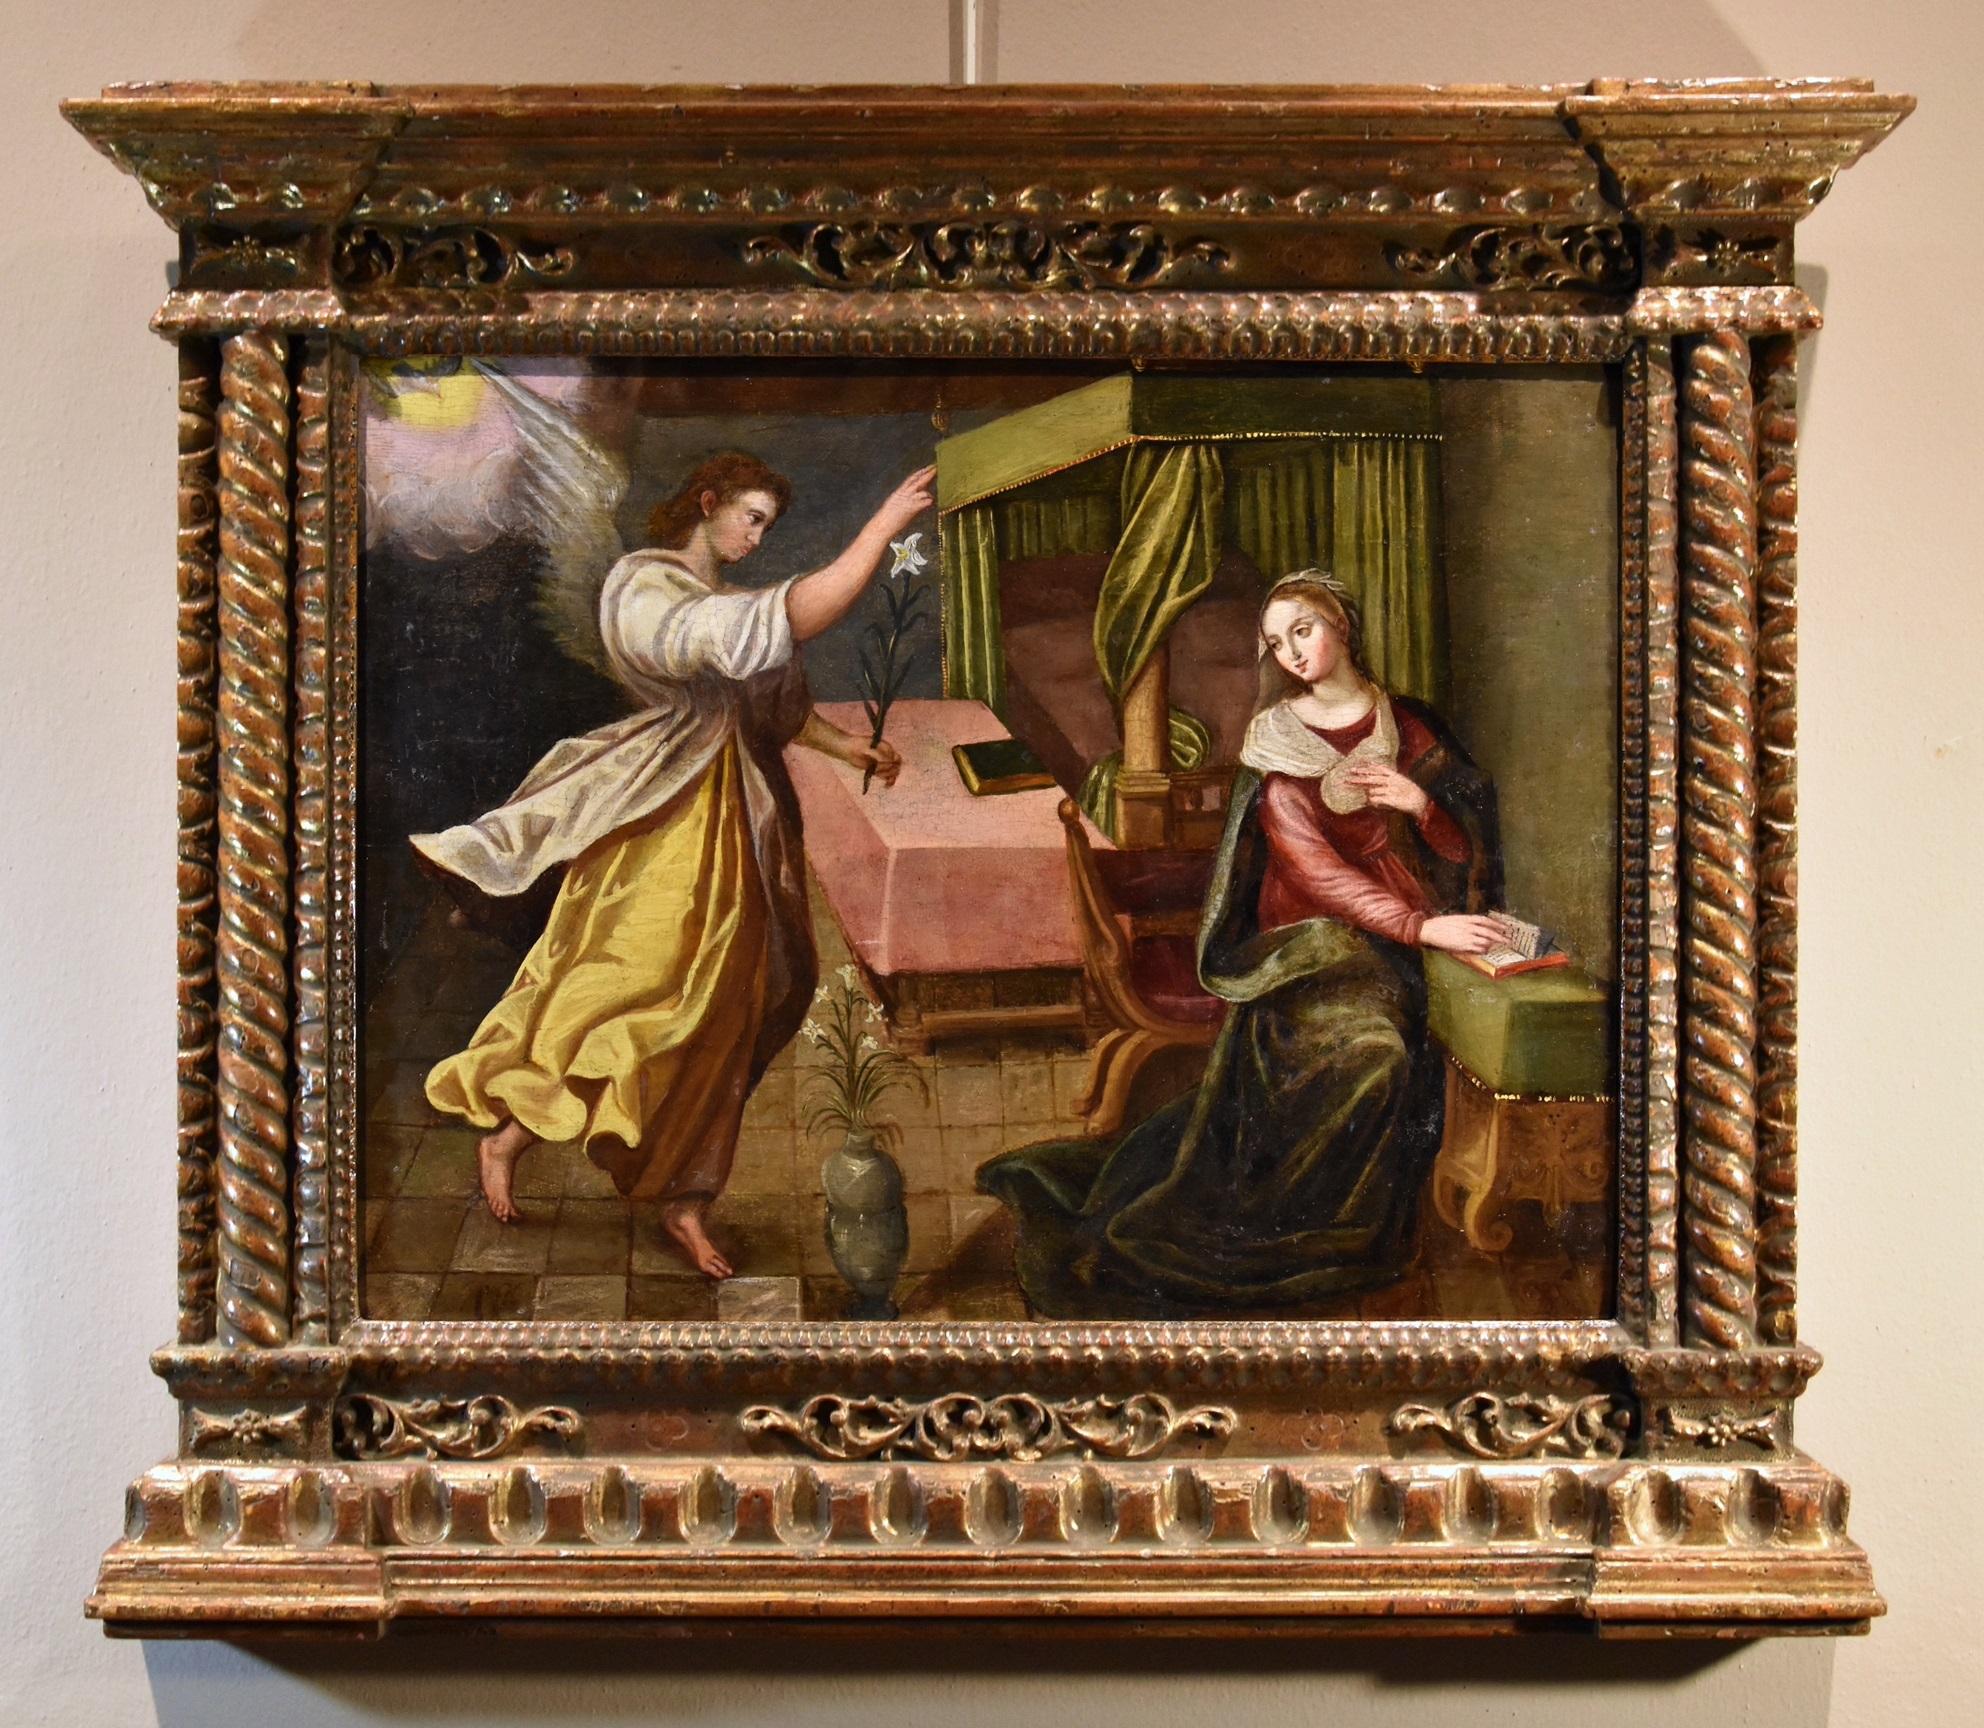 What is considered an old master painting?